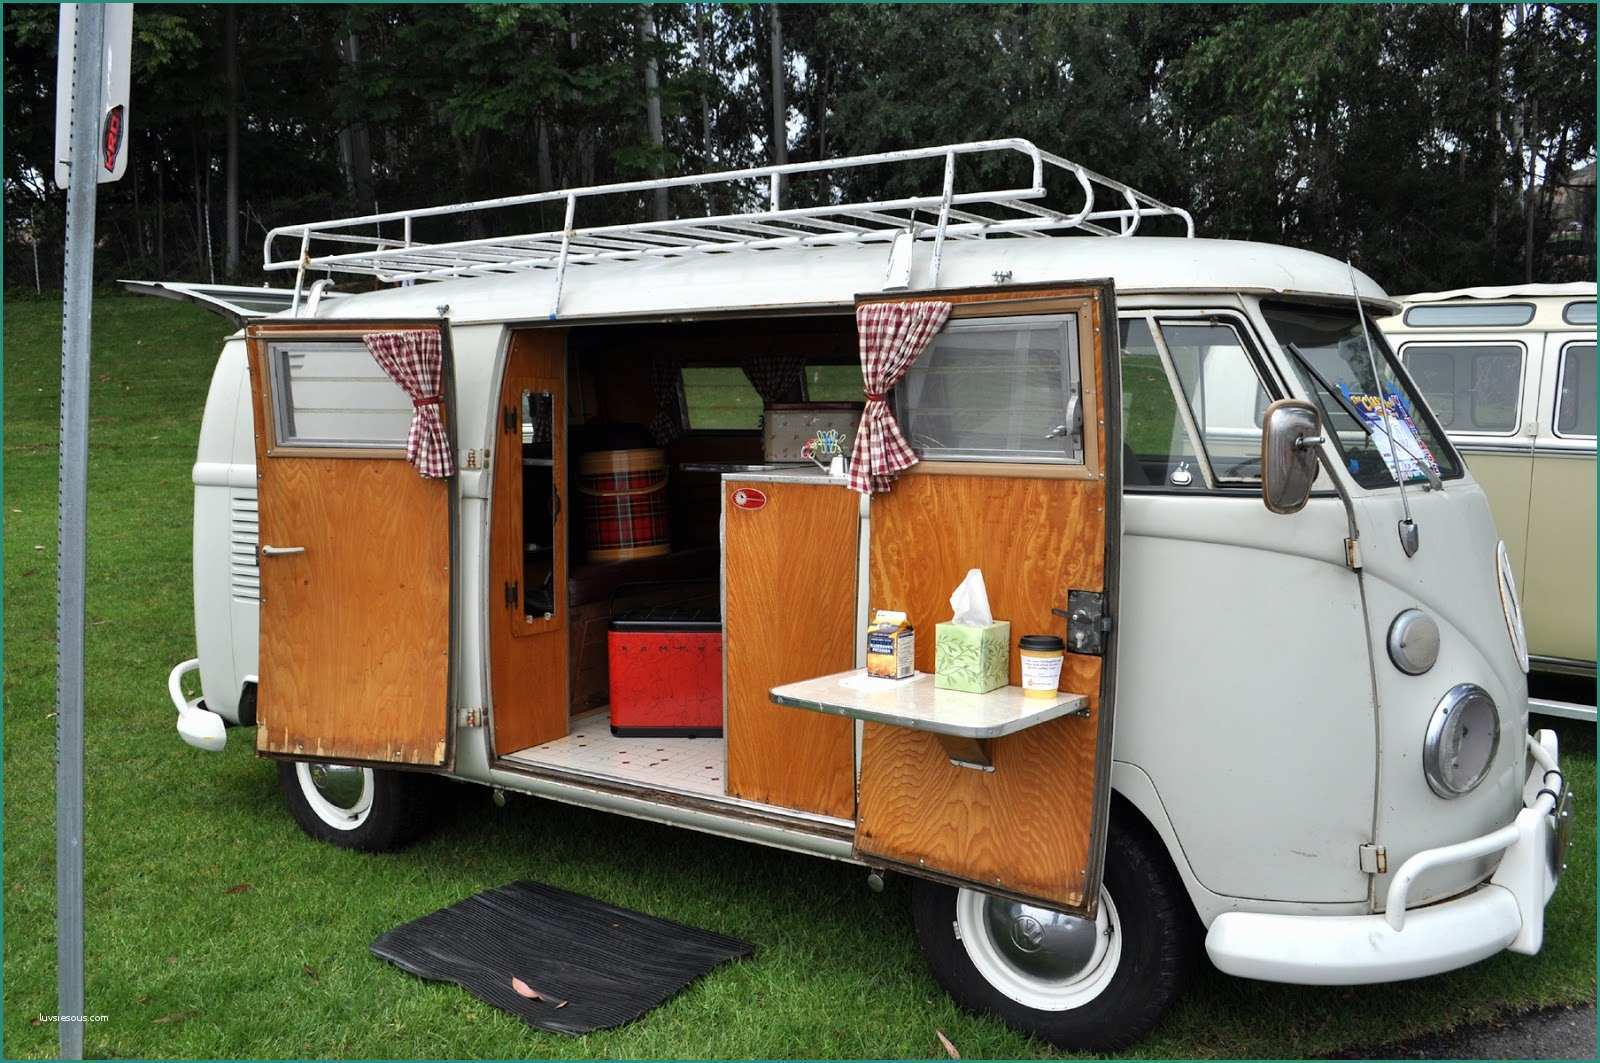 Furgoni Camperizzati Volkswagen Usati E Just A Car Guy some Of the Nicest Vw Bus Interiors From